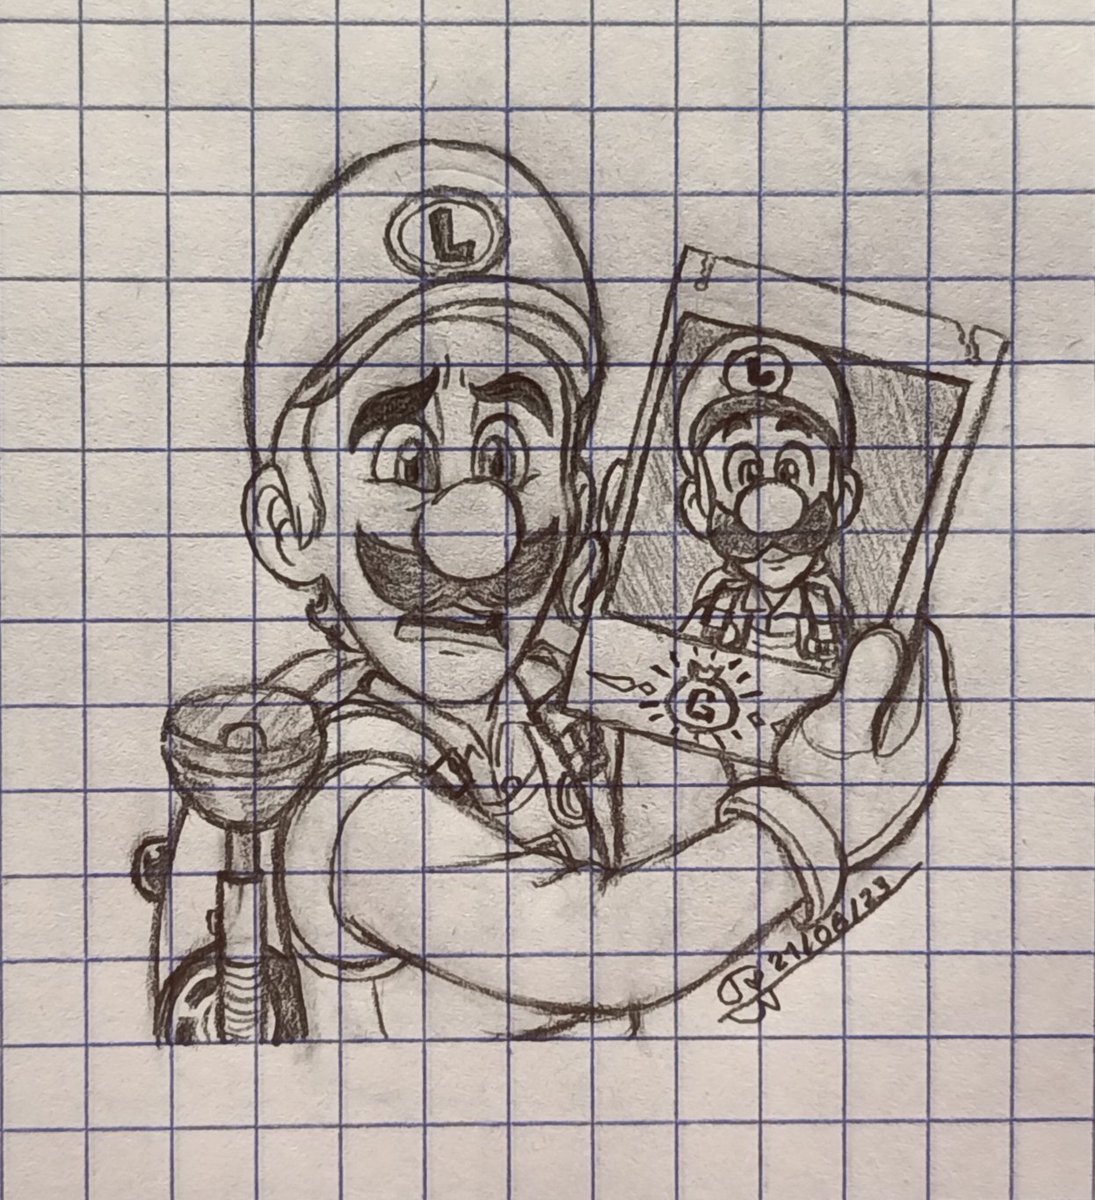 'They just can't get my nose right!'
Here's your monthly Luigi sketch! 💚😄 
Poor guy is wanted like a criminal, and he's more worried about the size of his nose 😆 Also, let's see if you know the reference 👀

#LuigisMansion #TheSuperMarioBrosMovie #Luigi #MarioMovie